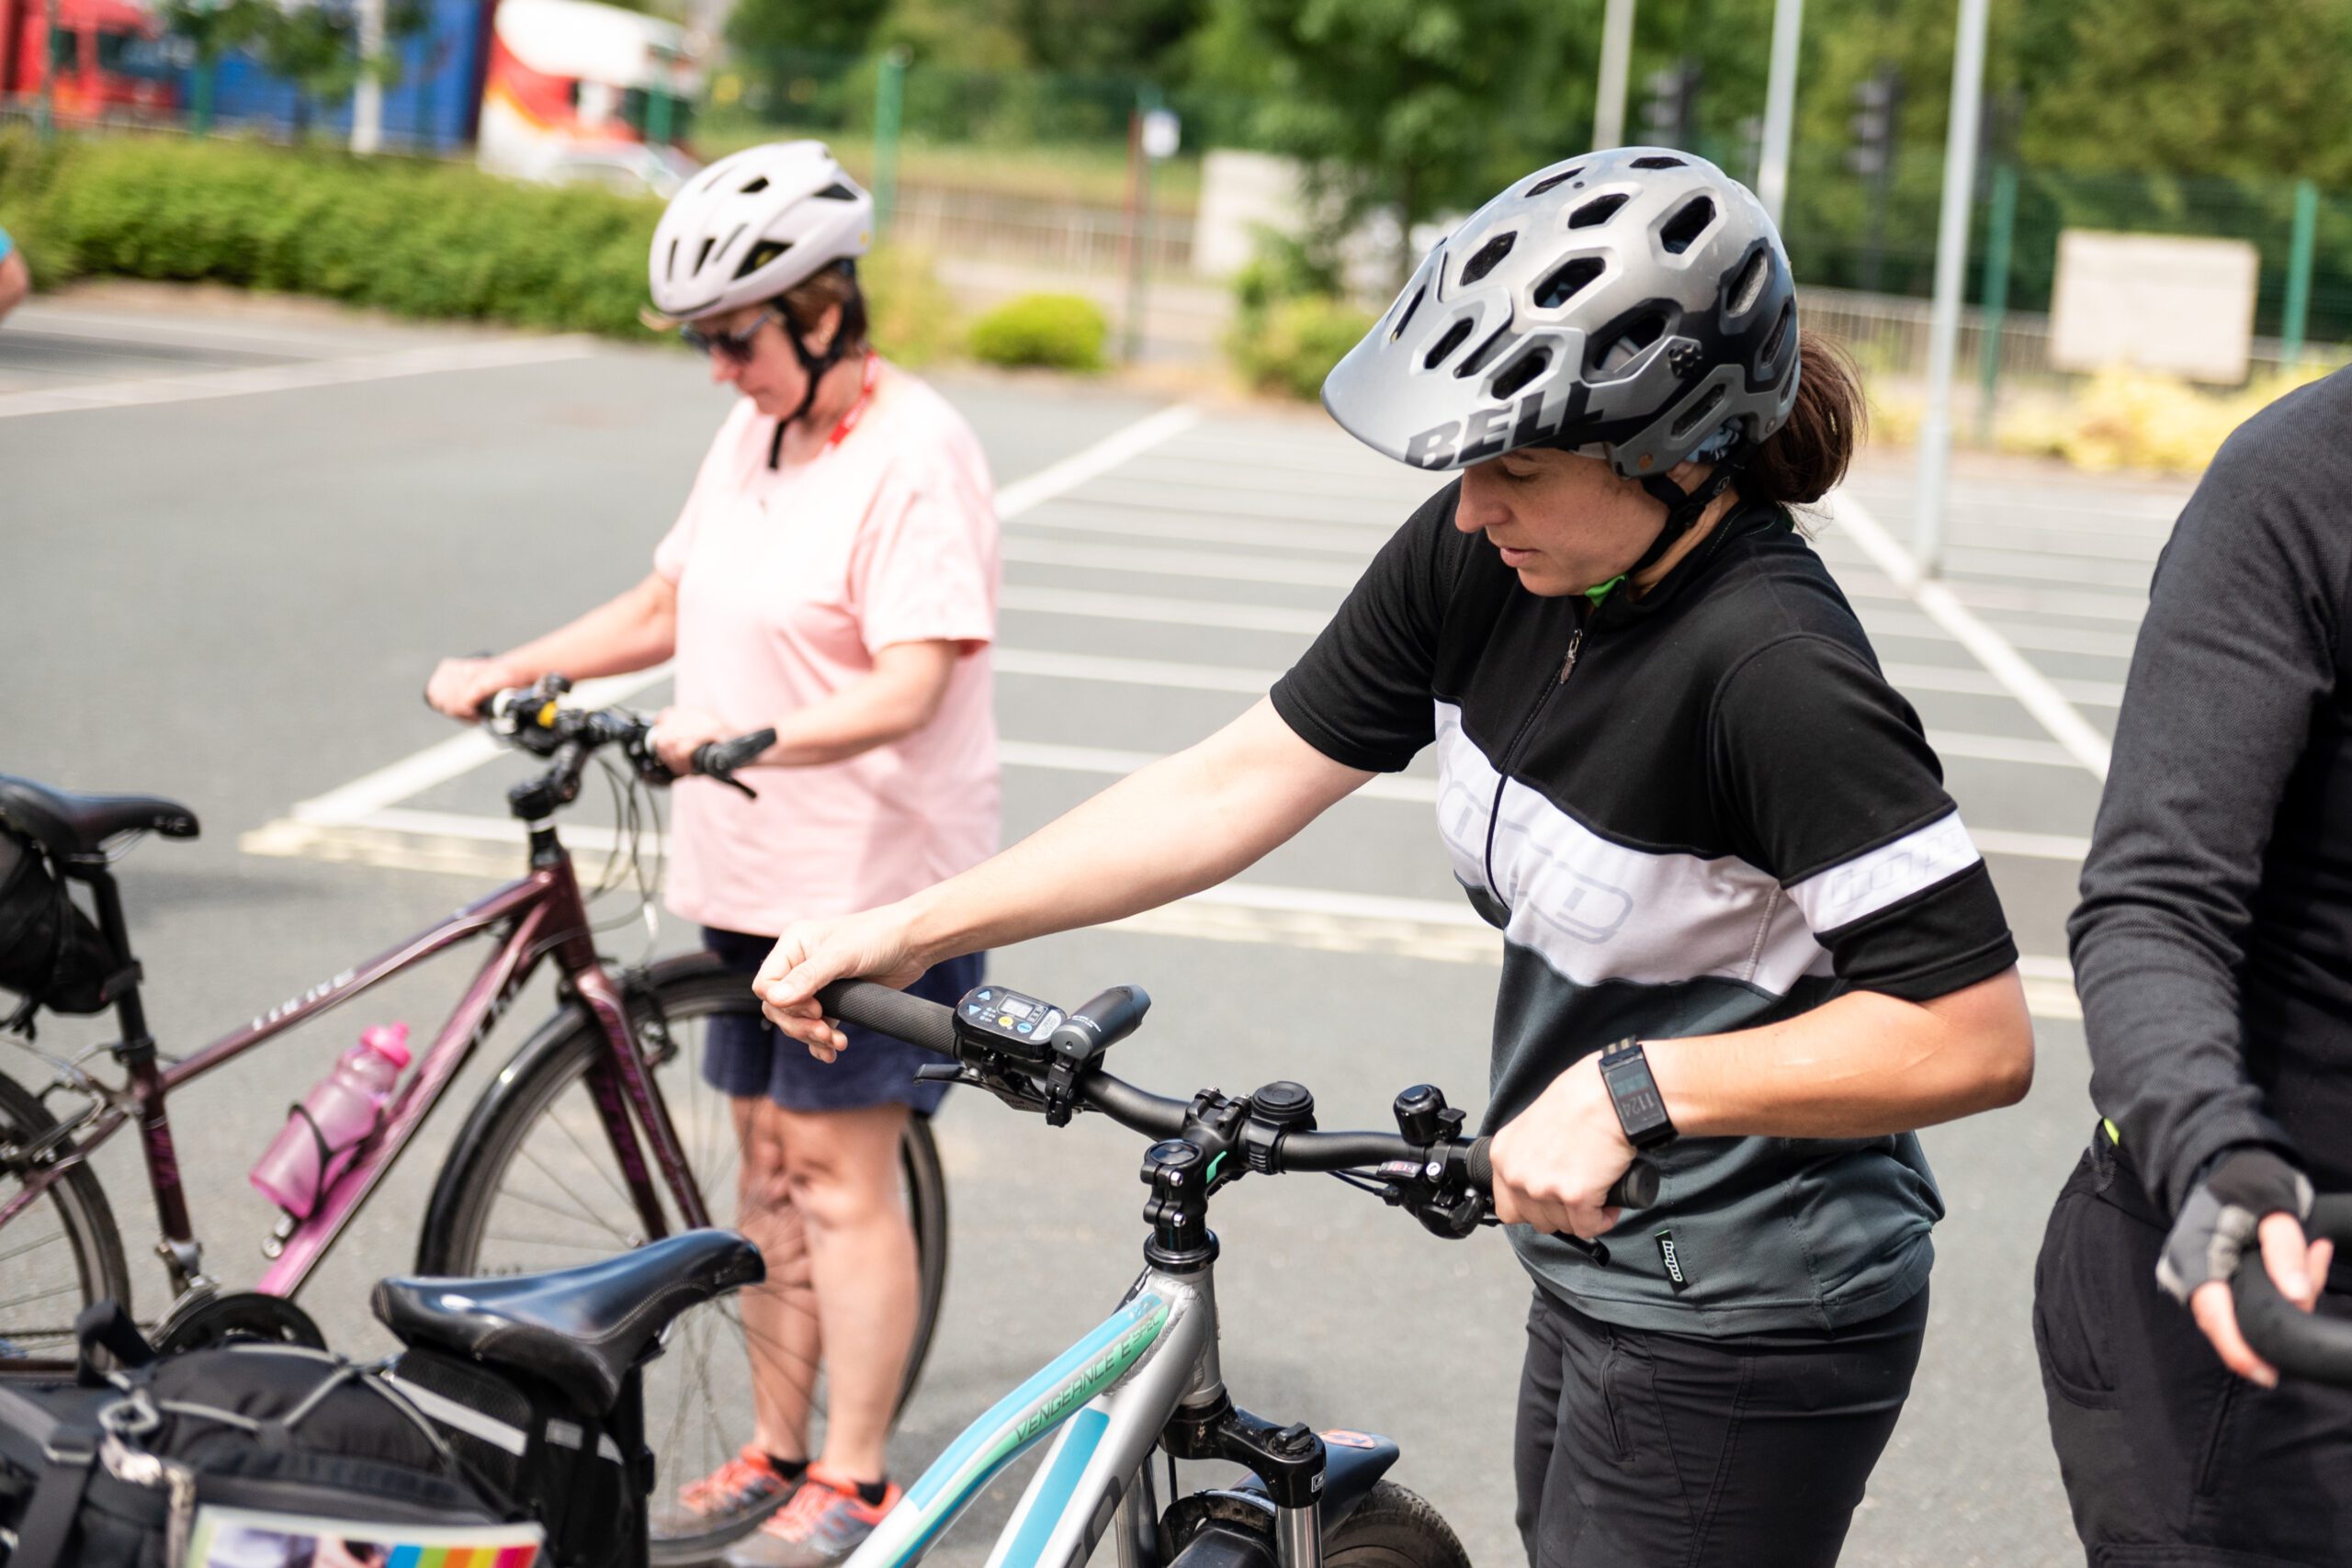 Two women wearing helmets are checking their cycles before they set off on a ride